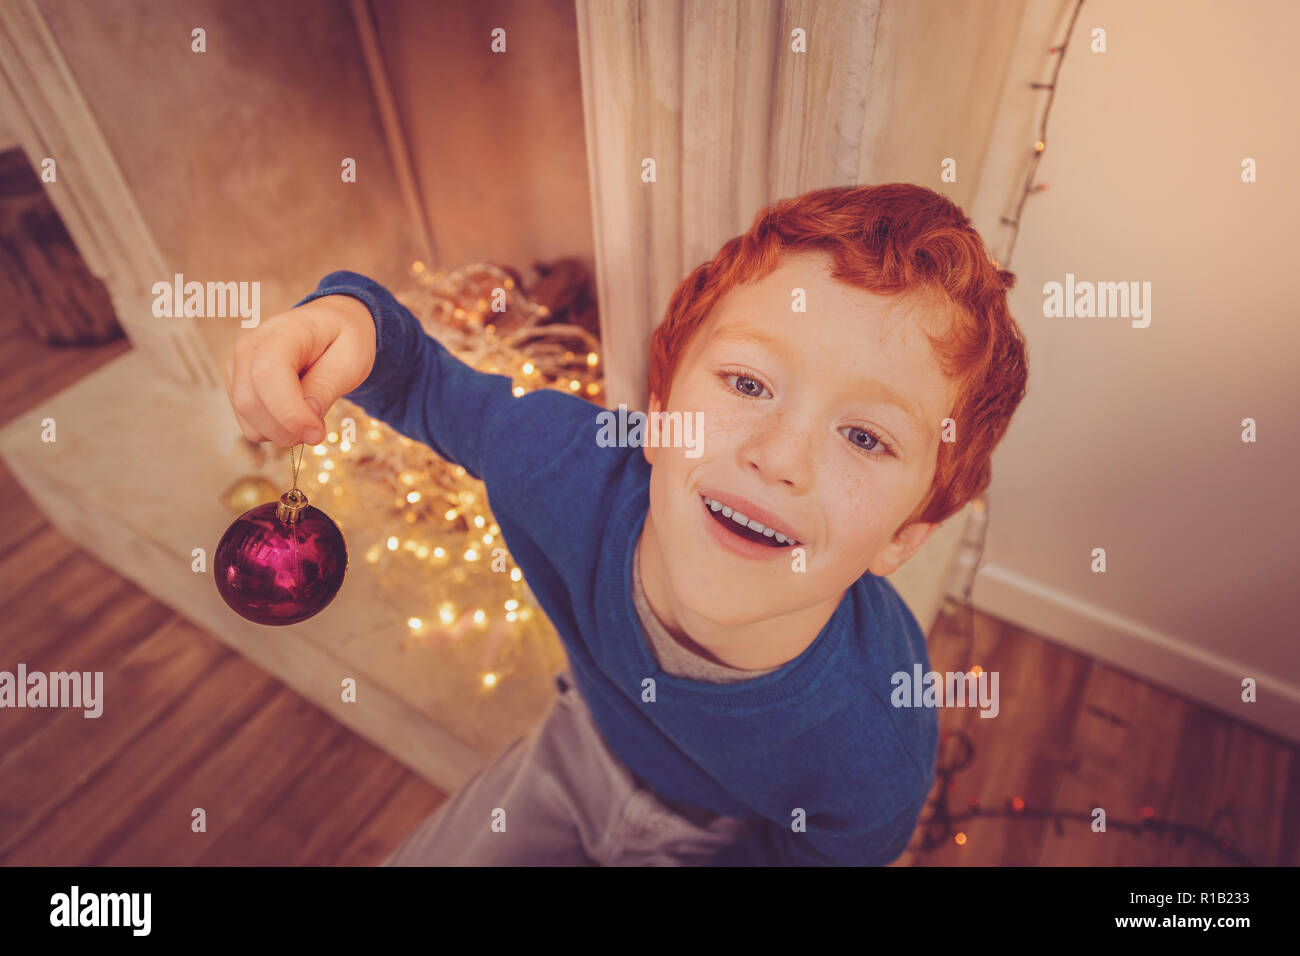 Top view of cute ginger-haired boy holding Christmas ball Stock Photo